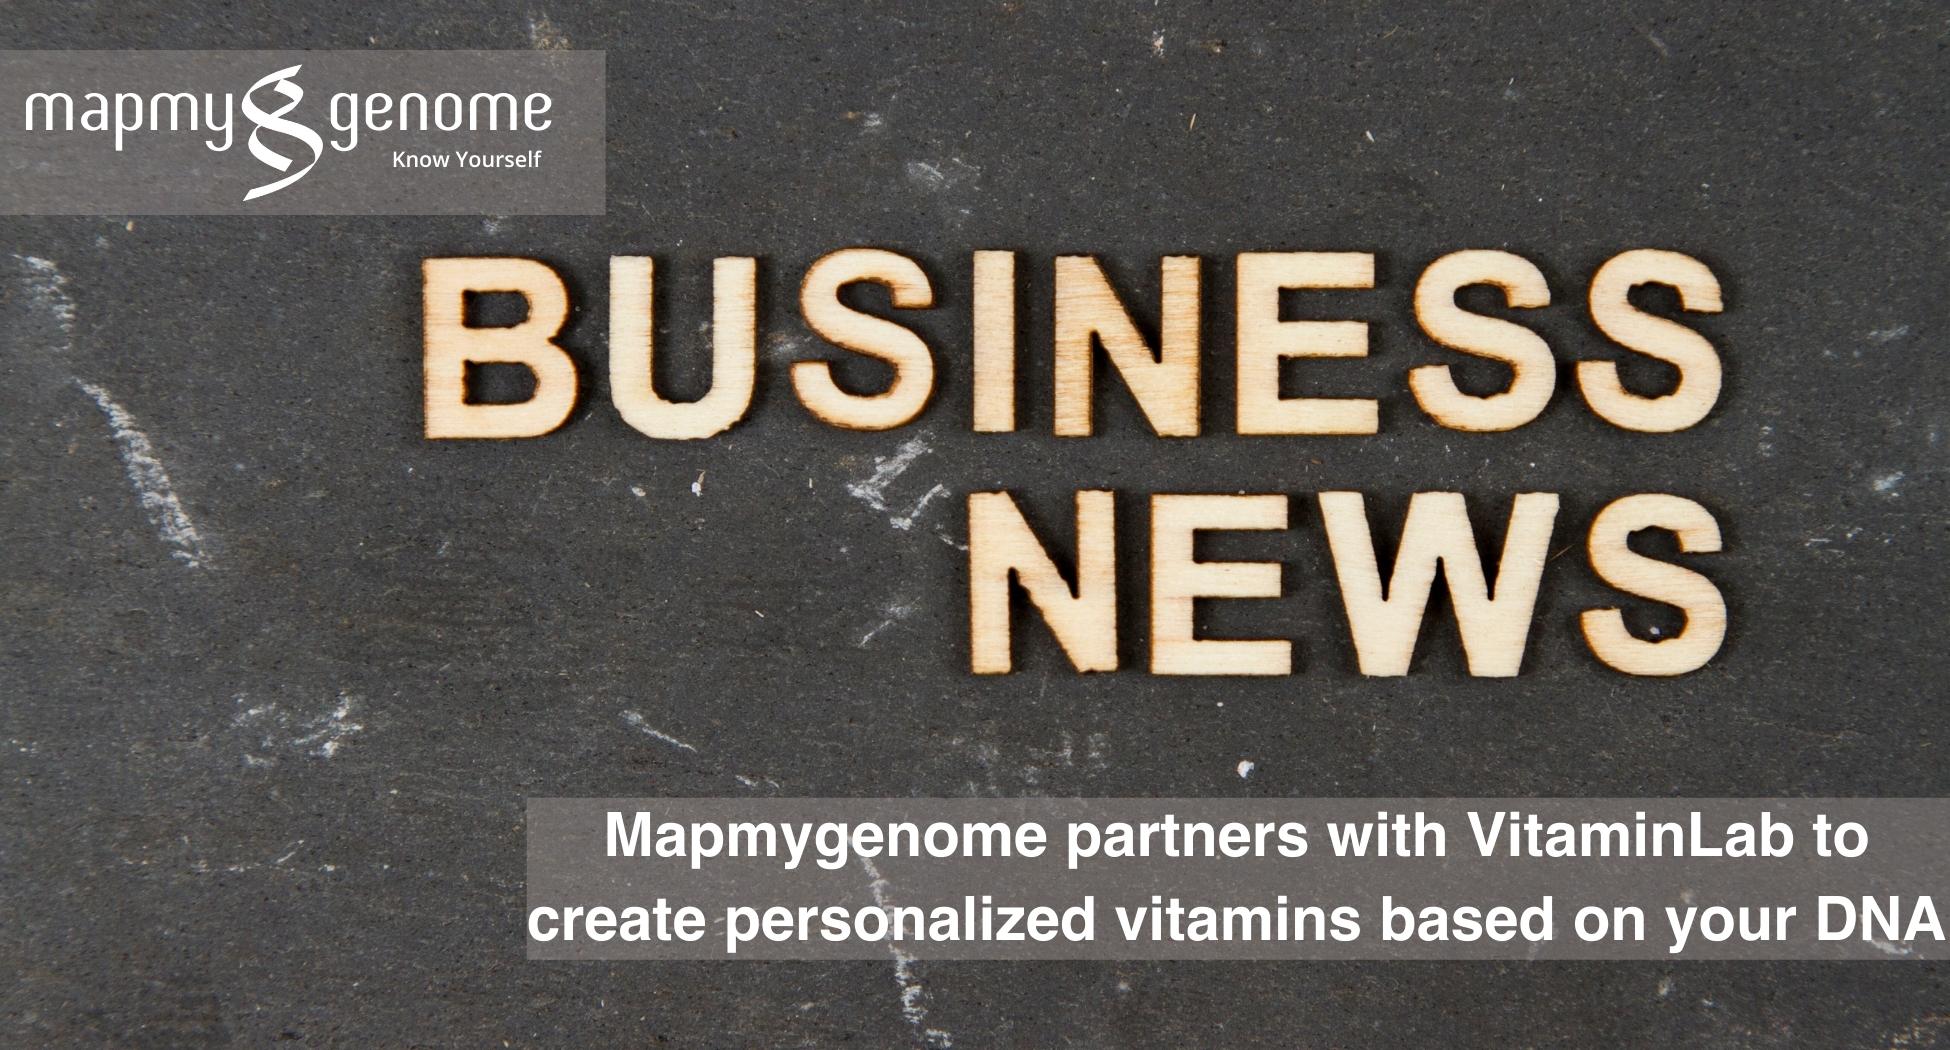 Mapmygenome partners with VitaminLab to create personalized vitamins based on your DNA